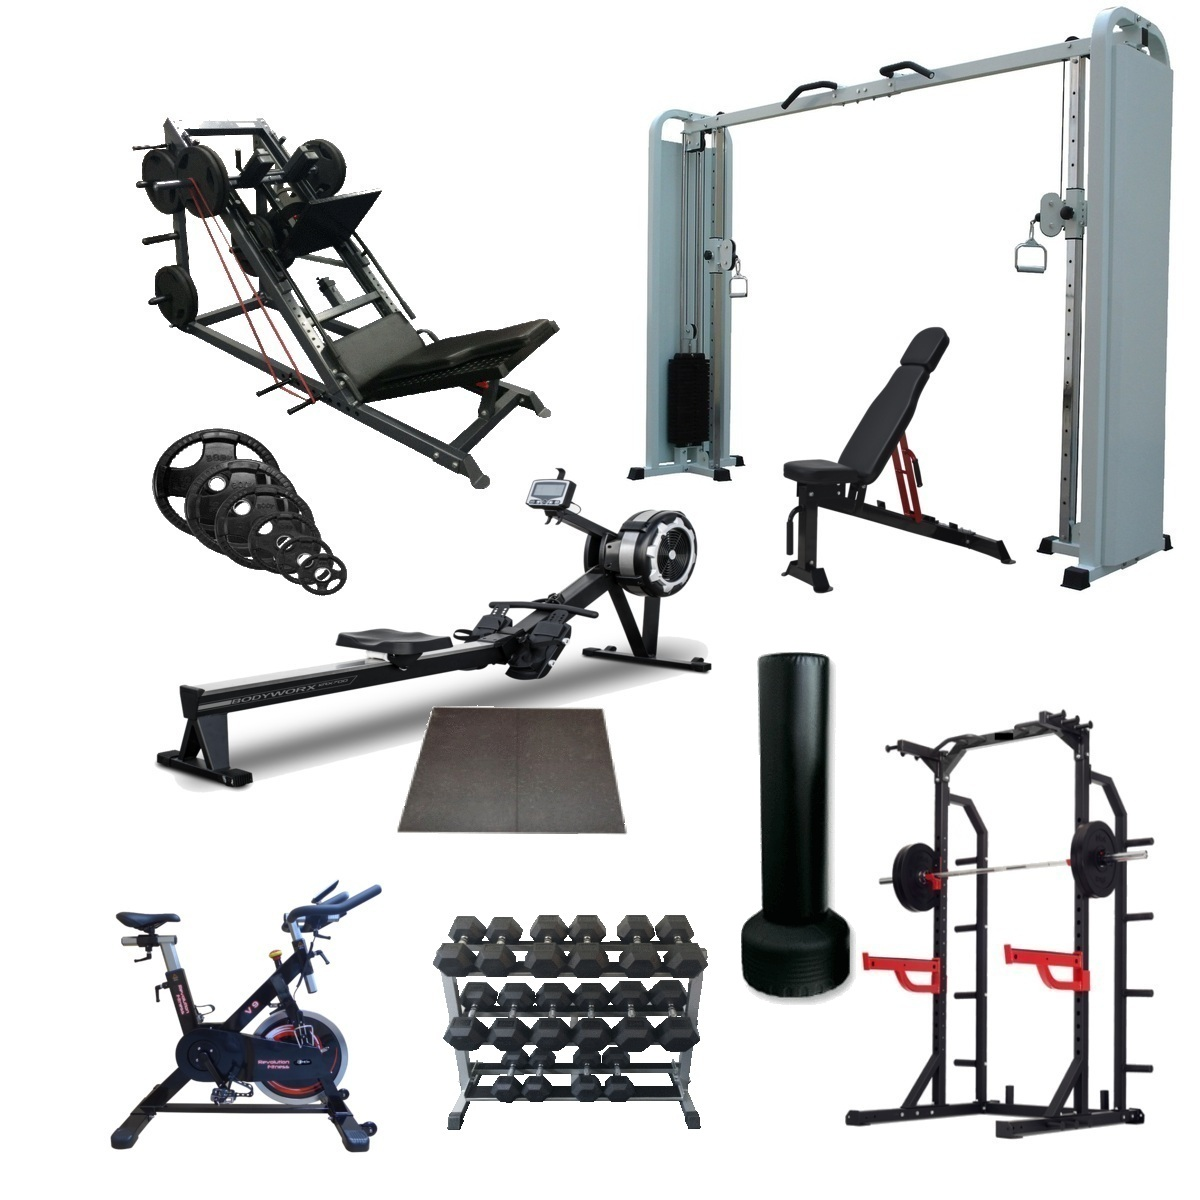 The Most Popular Home Gym Equipment on The Market